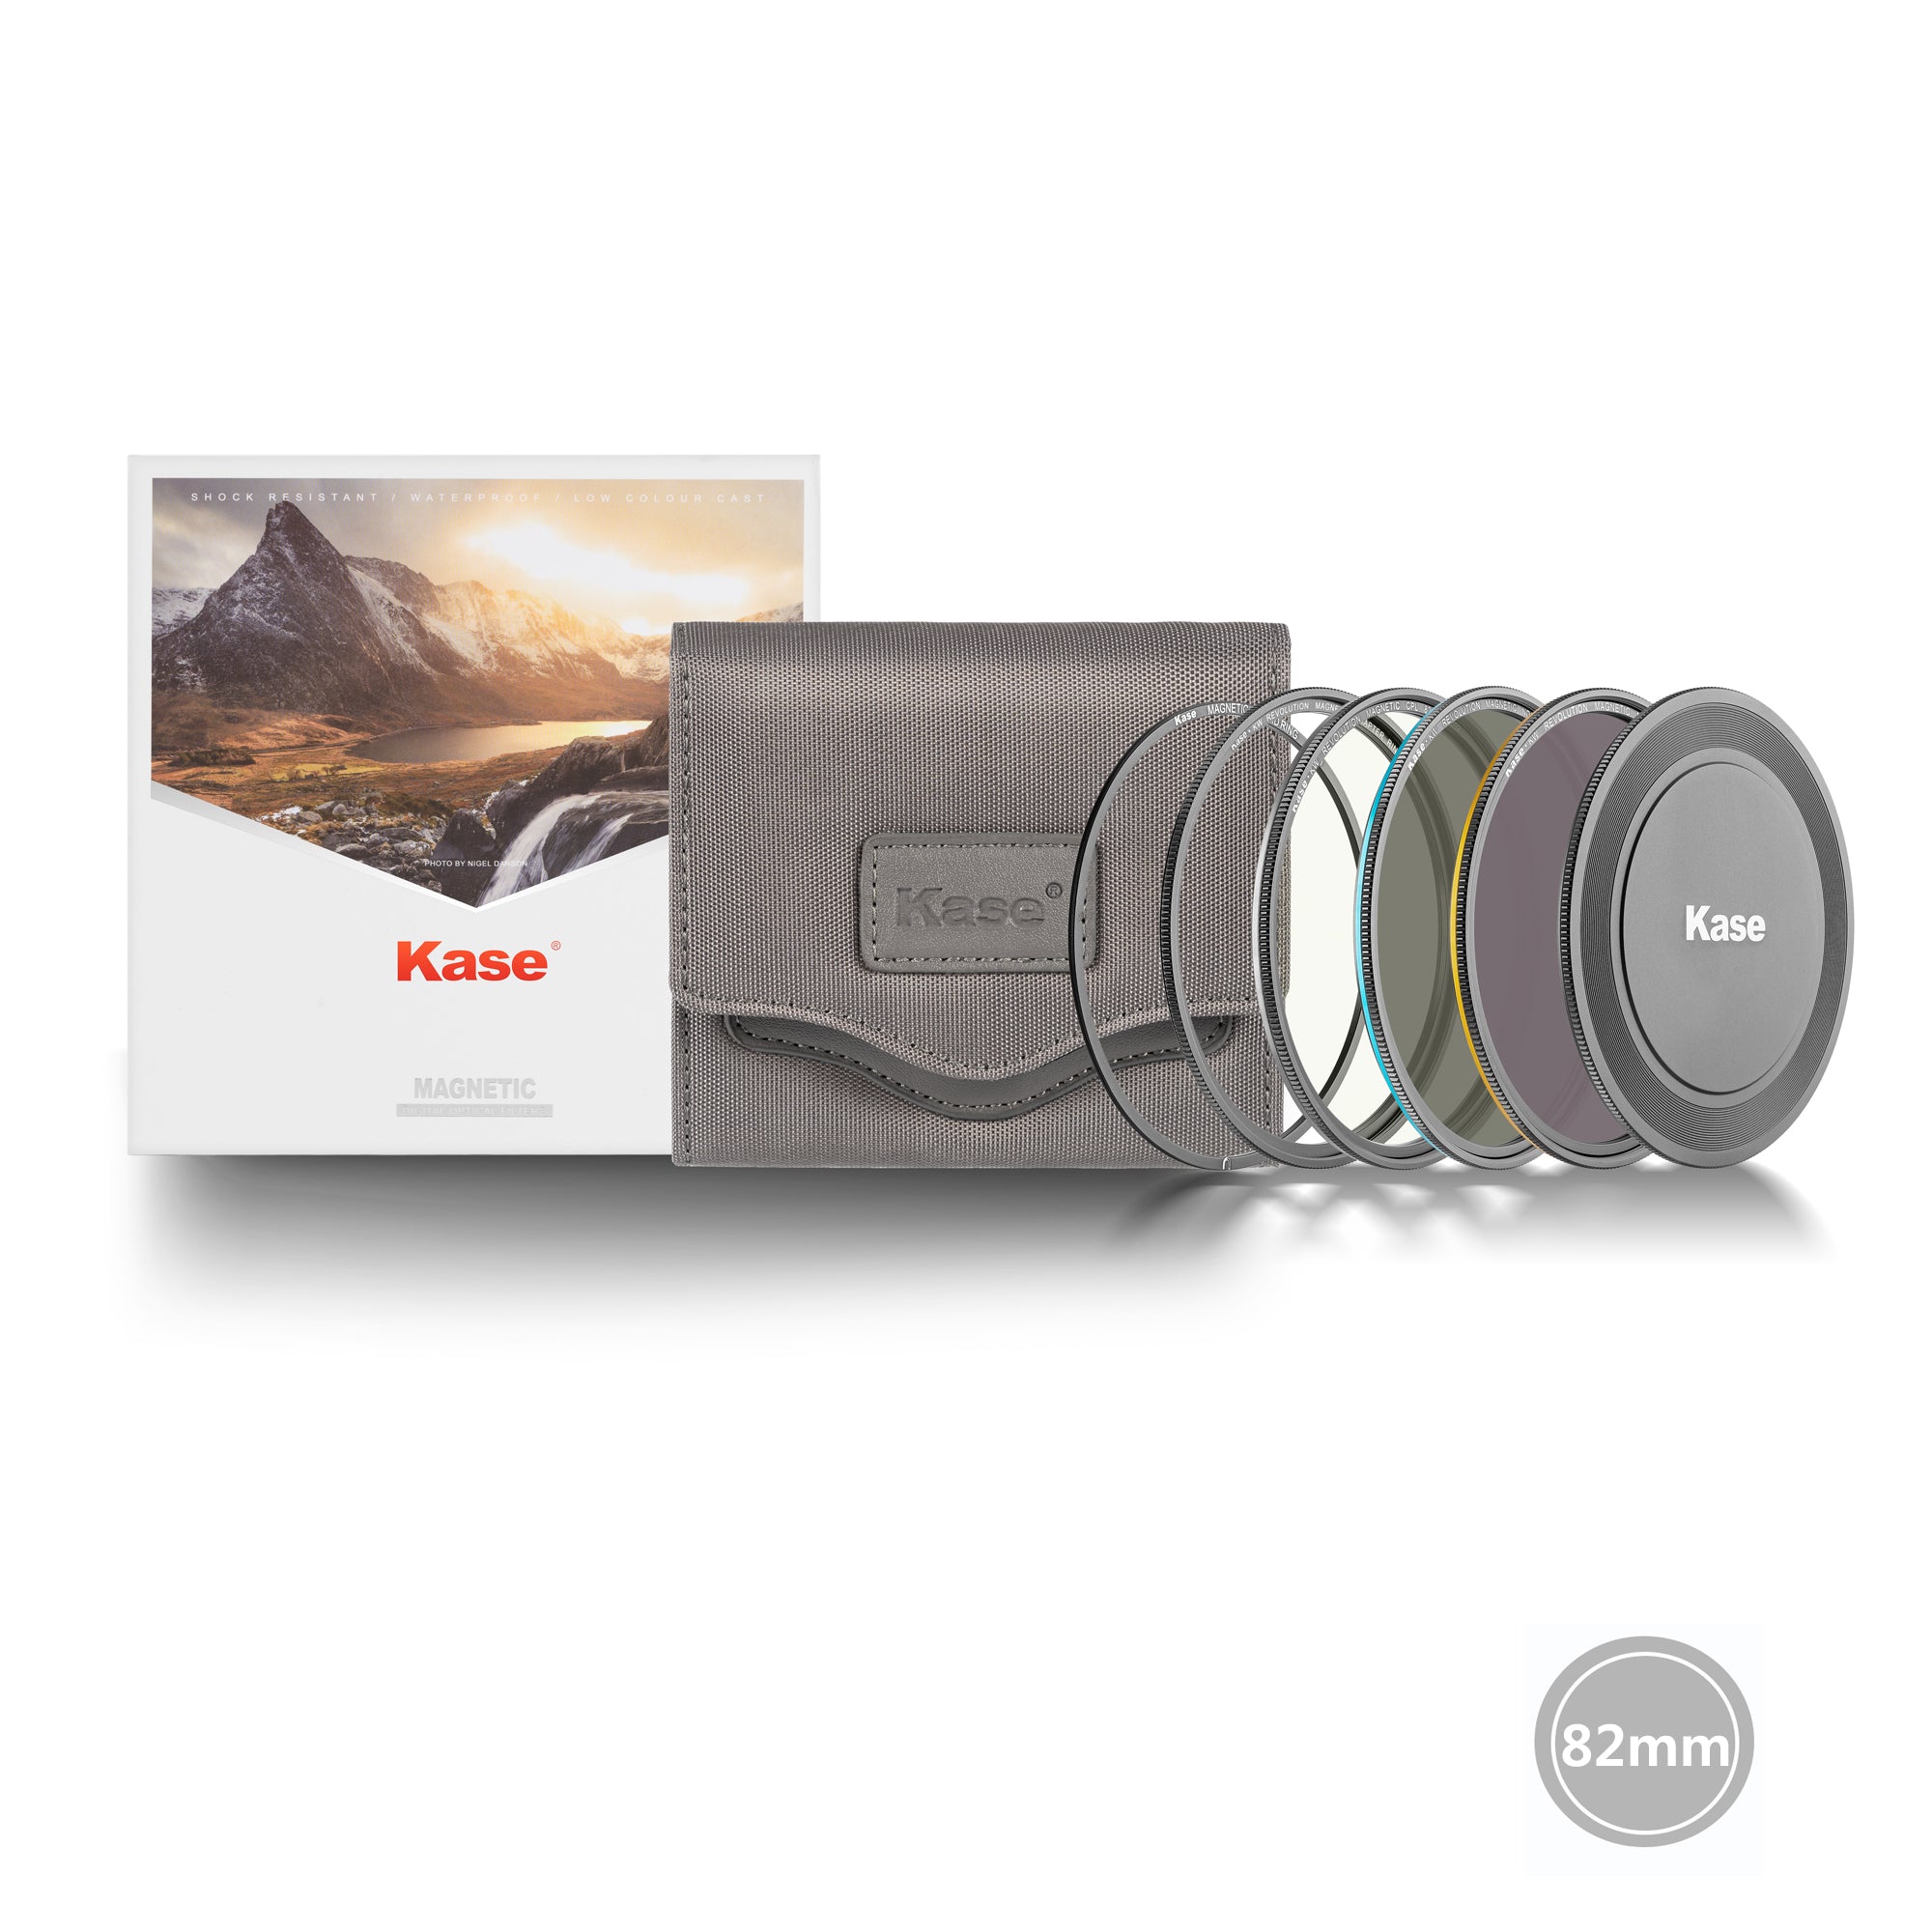 Product Image of Kase Revolution Magnetic Circular Filters 82mm Entry Kit